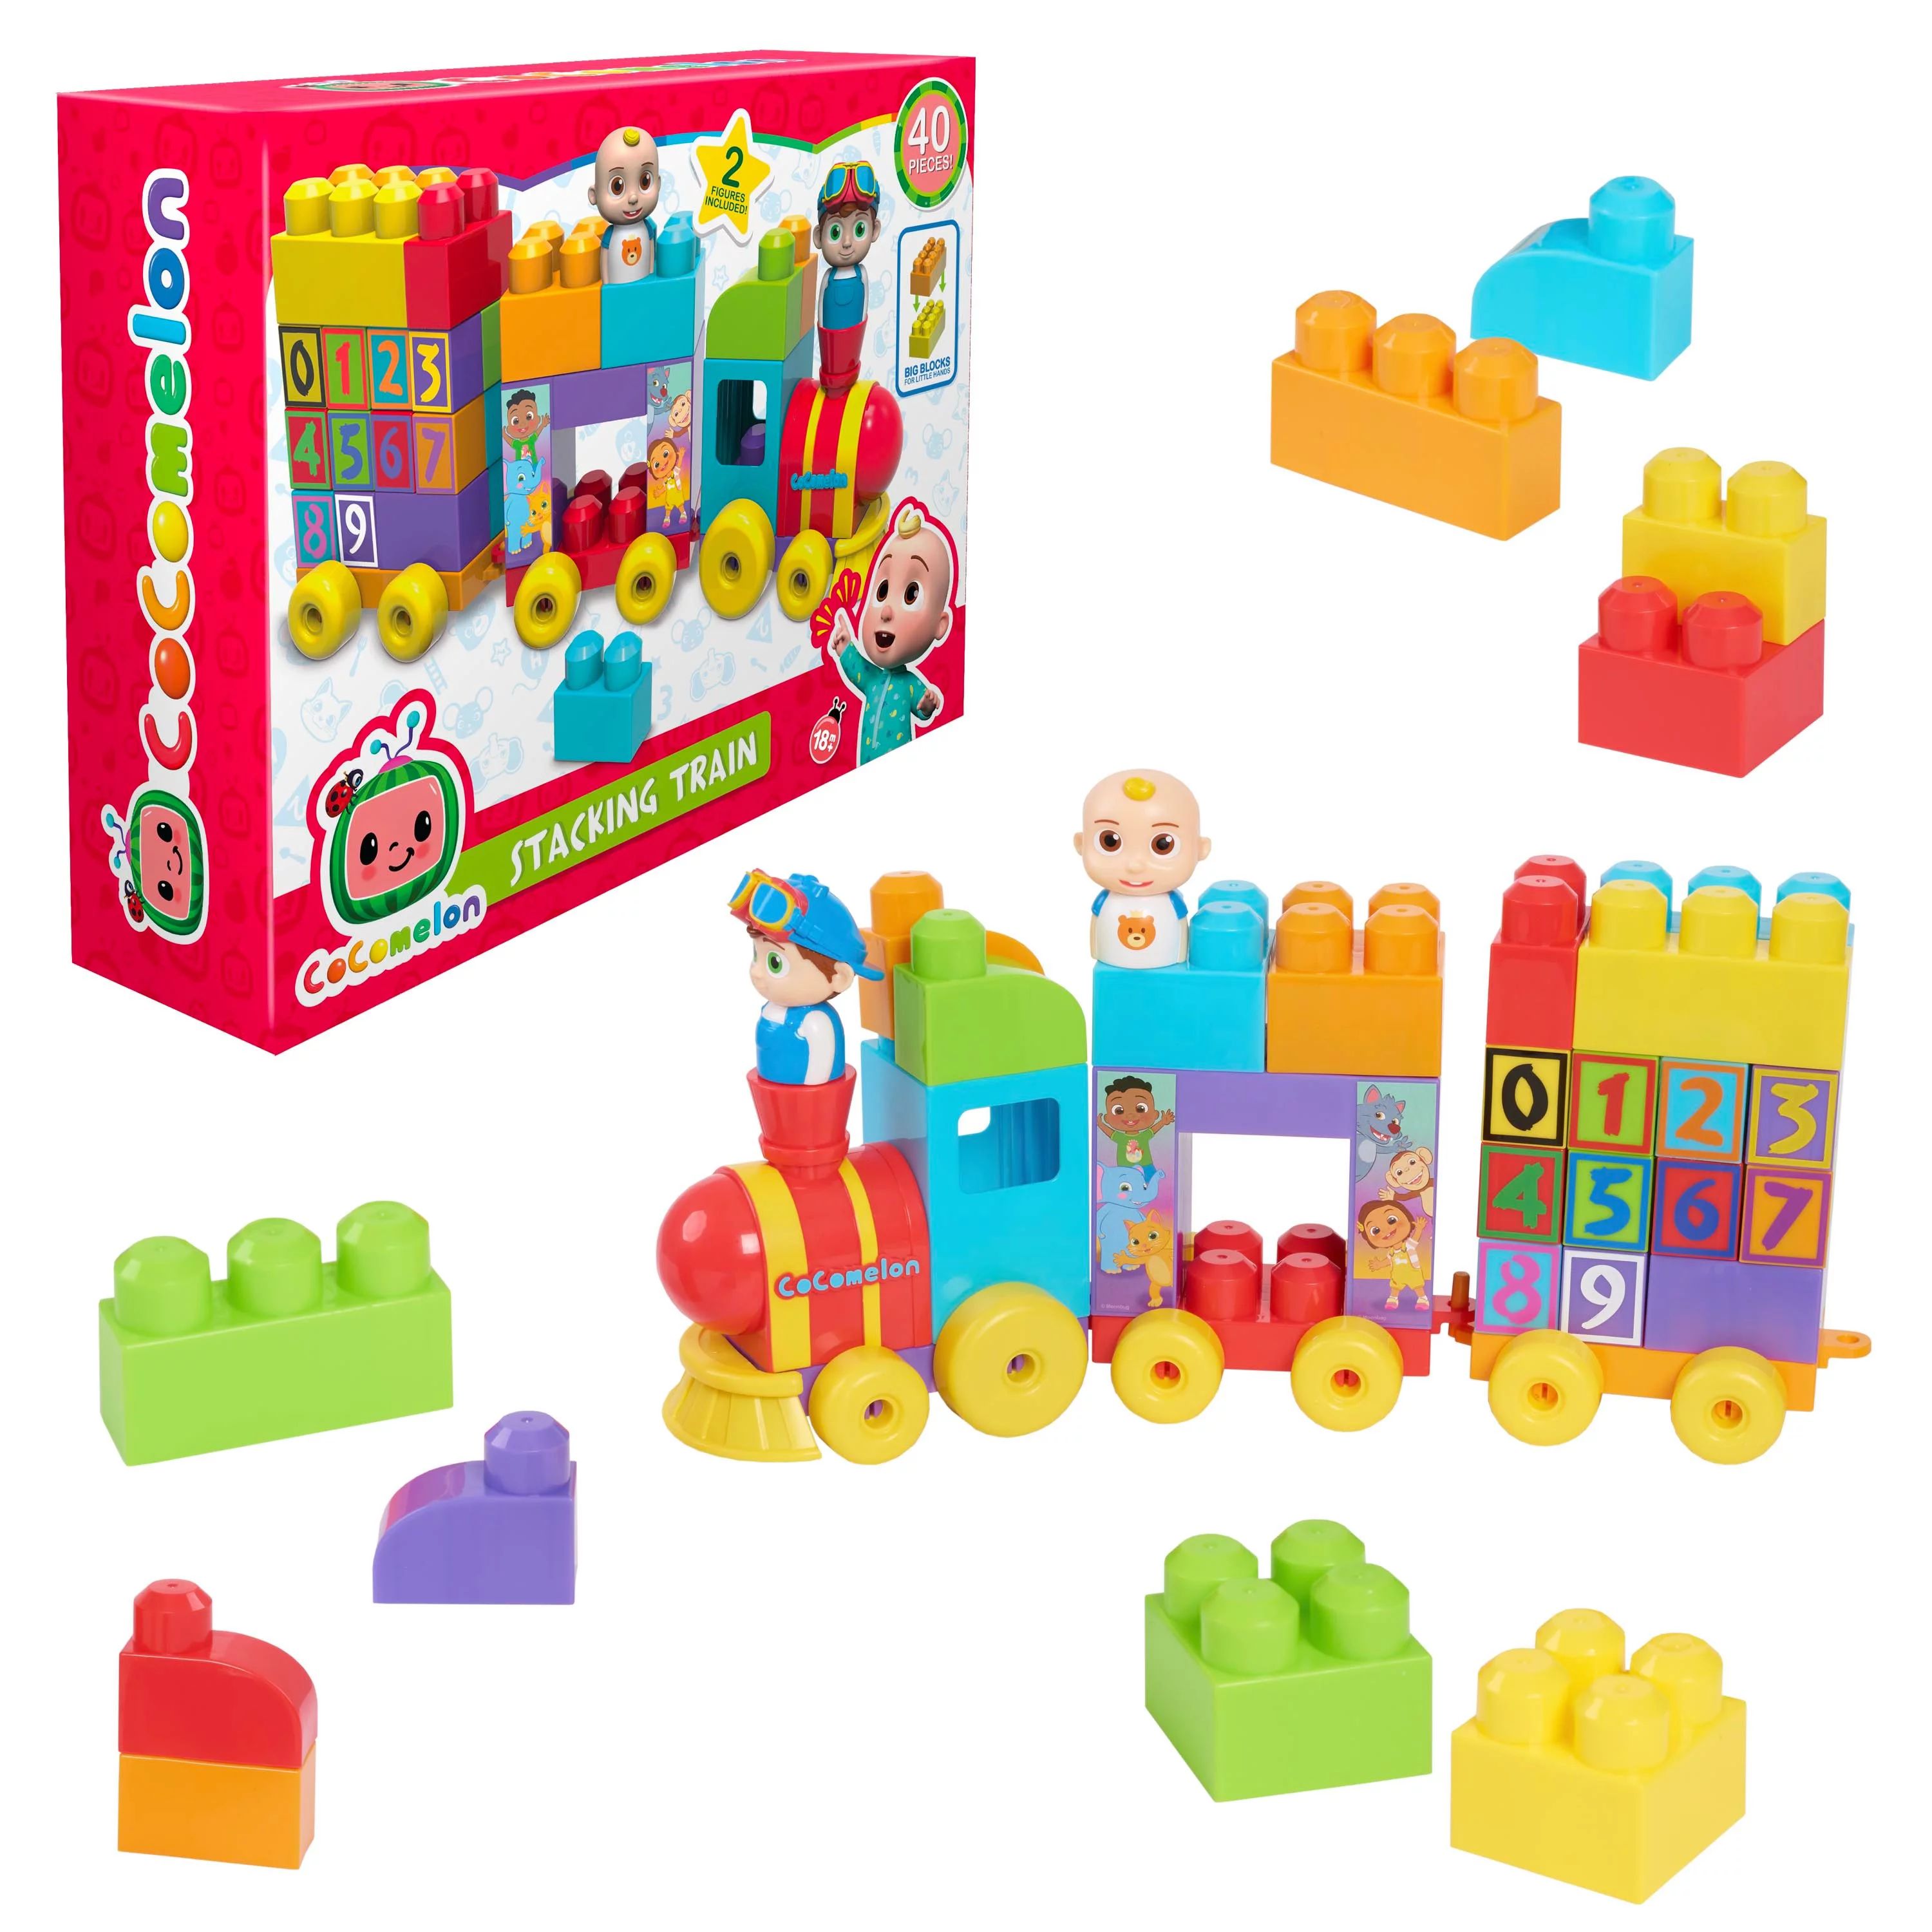 Cocomelon Stacking Train, 40 Piece Large Building Block Set, Kids Toys for Ages 18 month | Walmart (US)